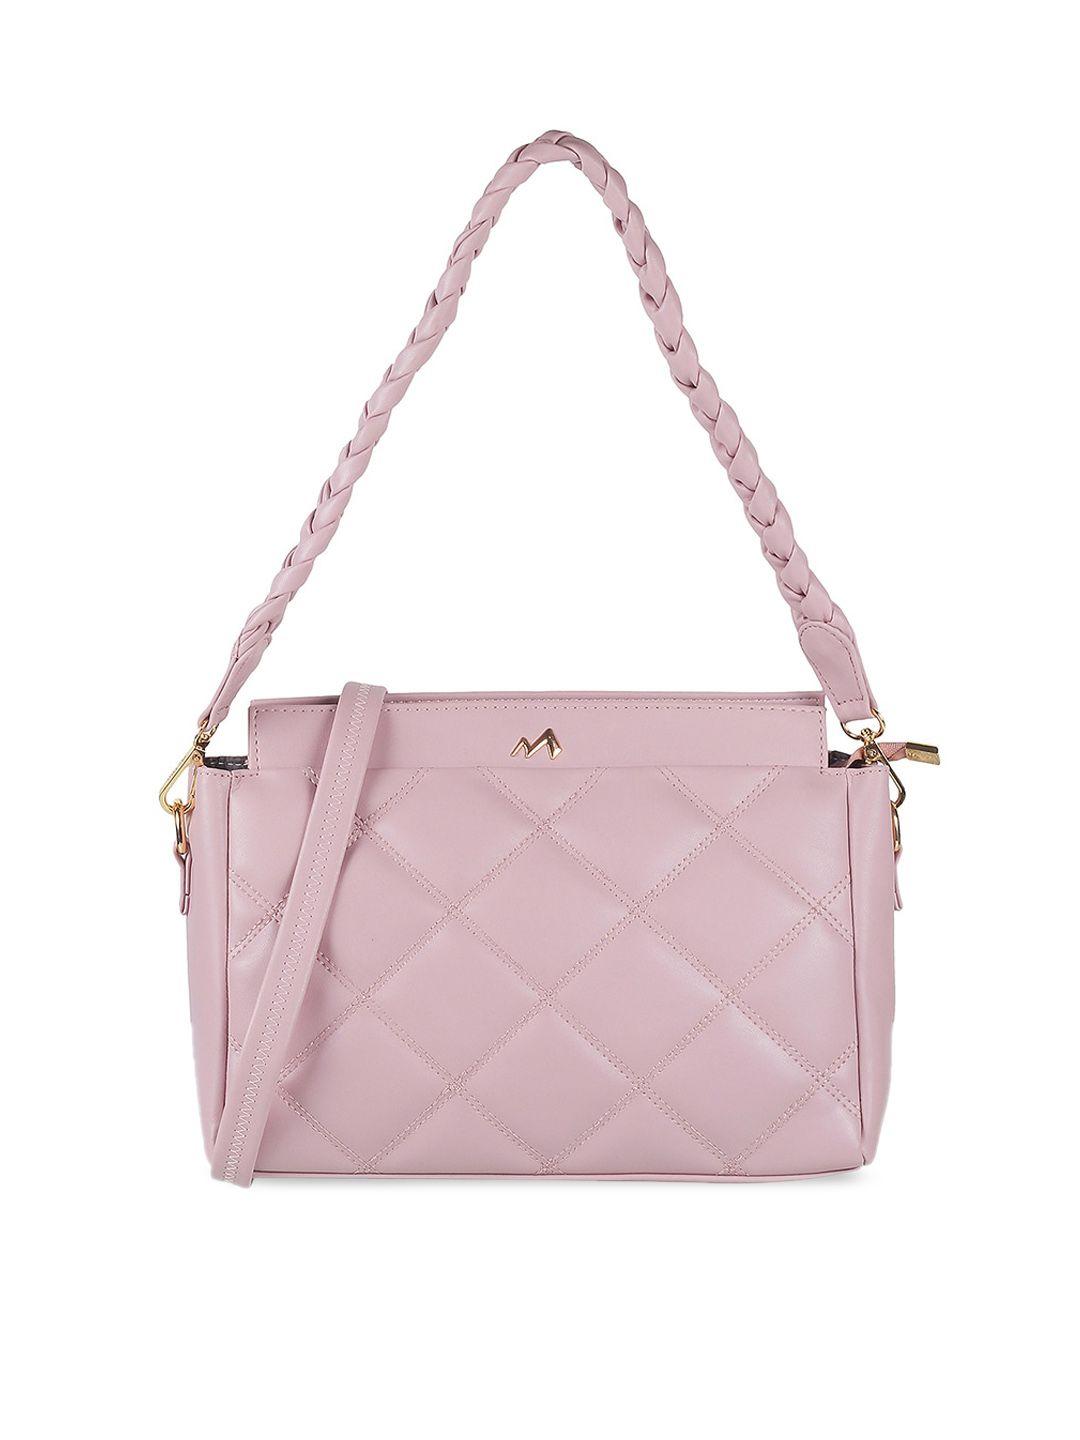 metro geometric textured structured shoulder bag with quilted detail